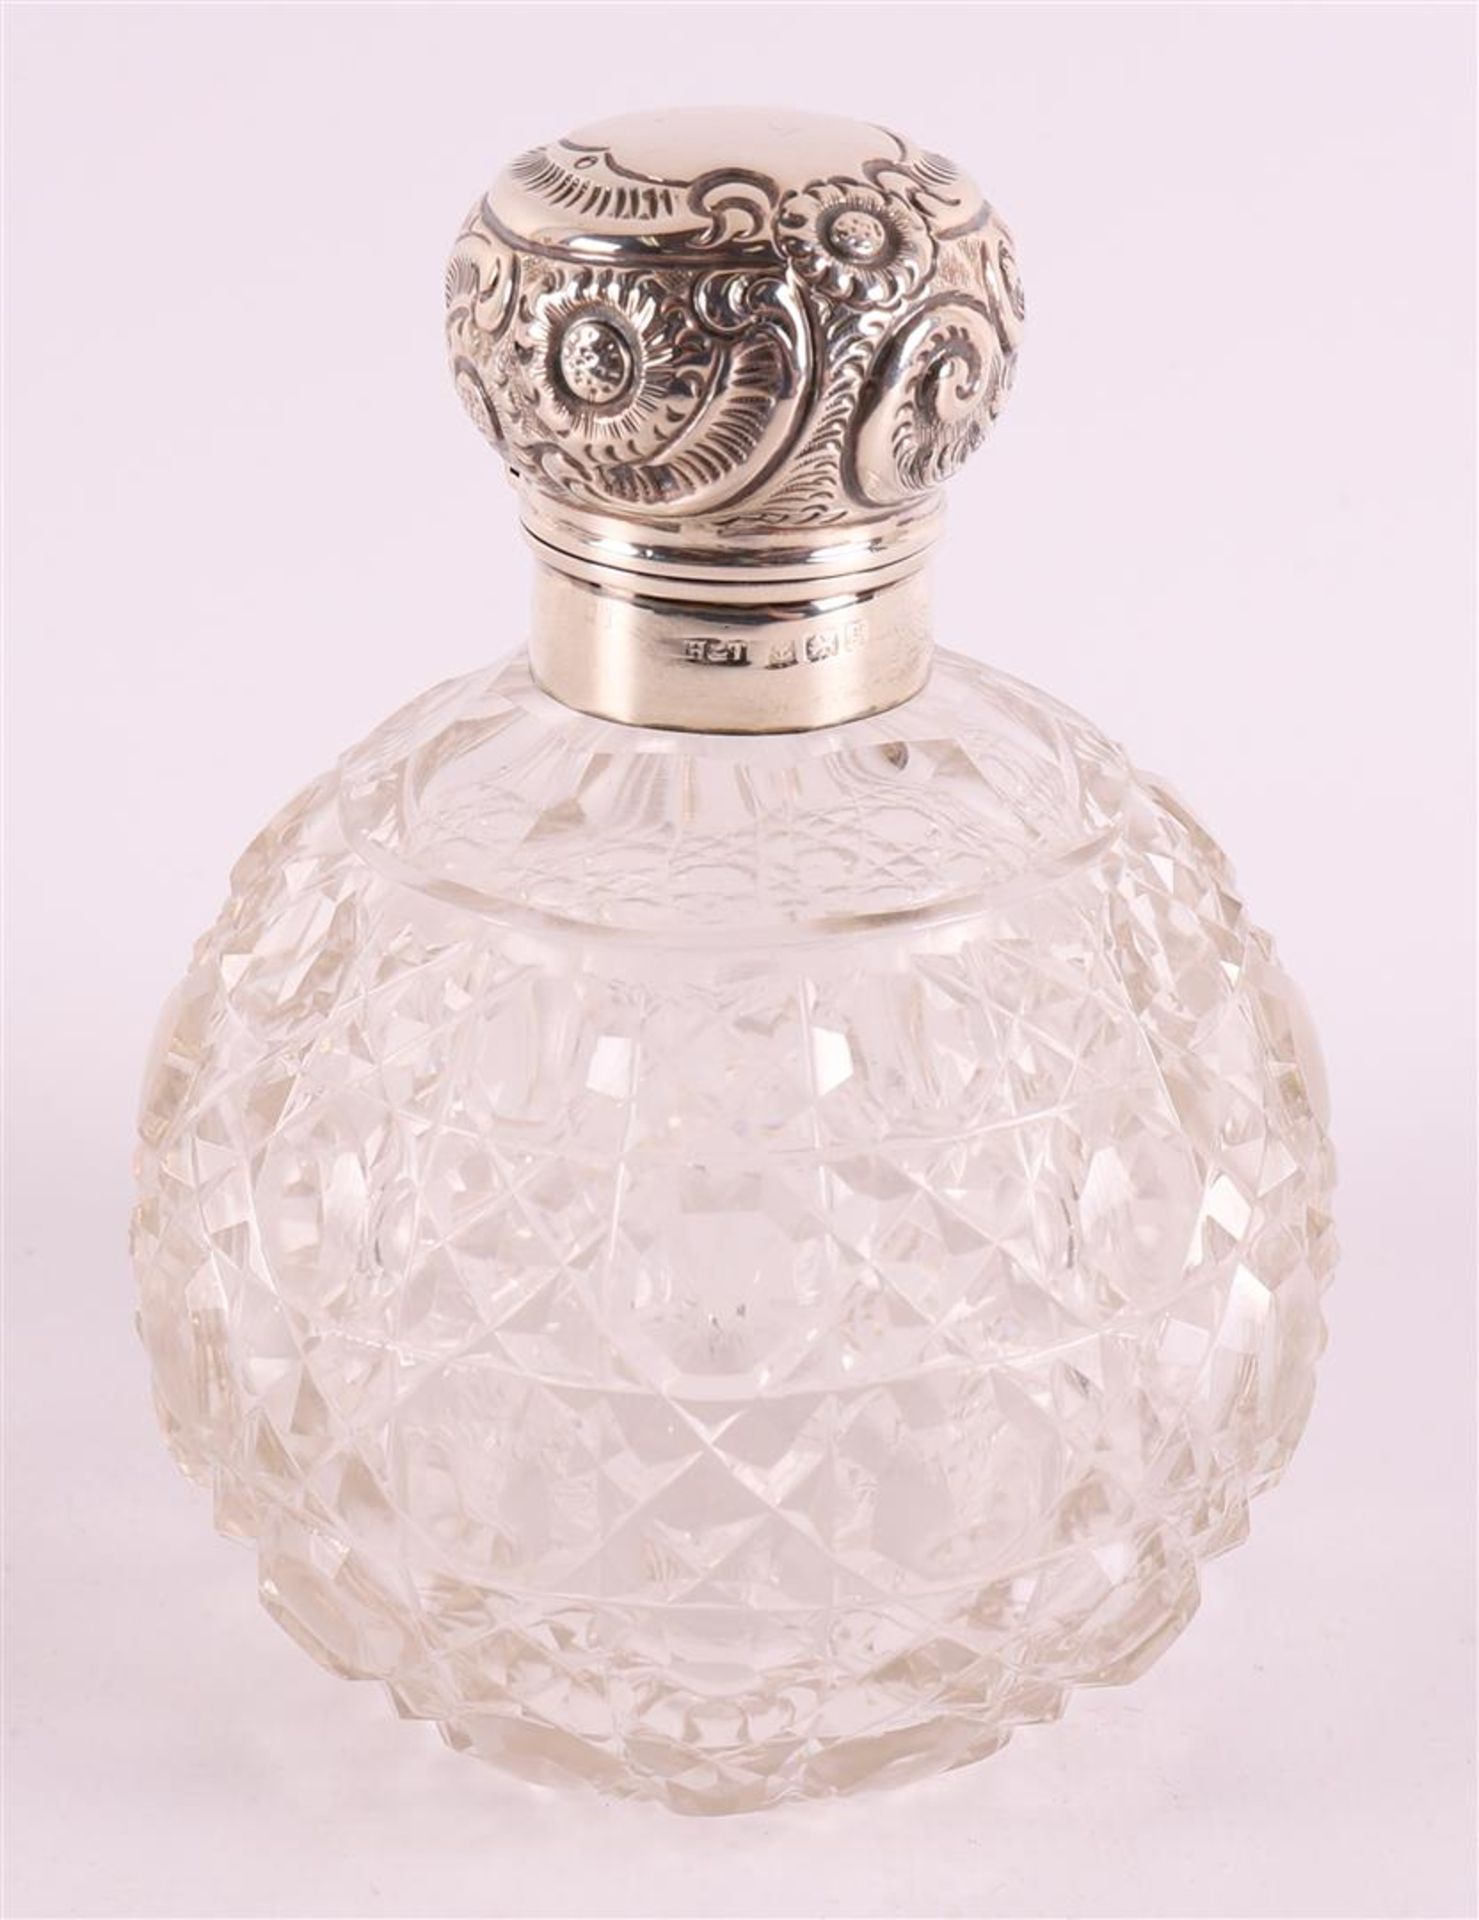 A spherical crystal odor flask with silver valve closure, England - Image 2 of 3